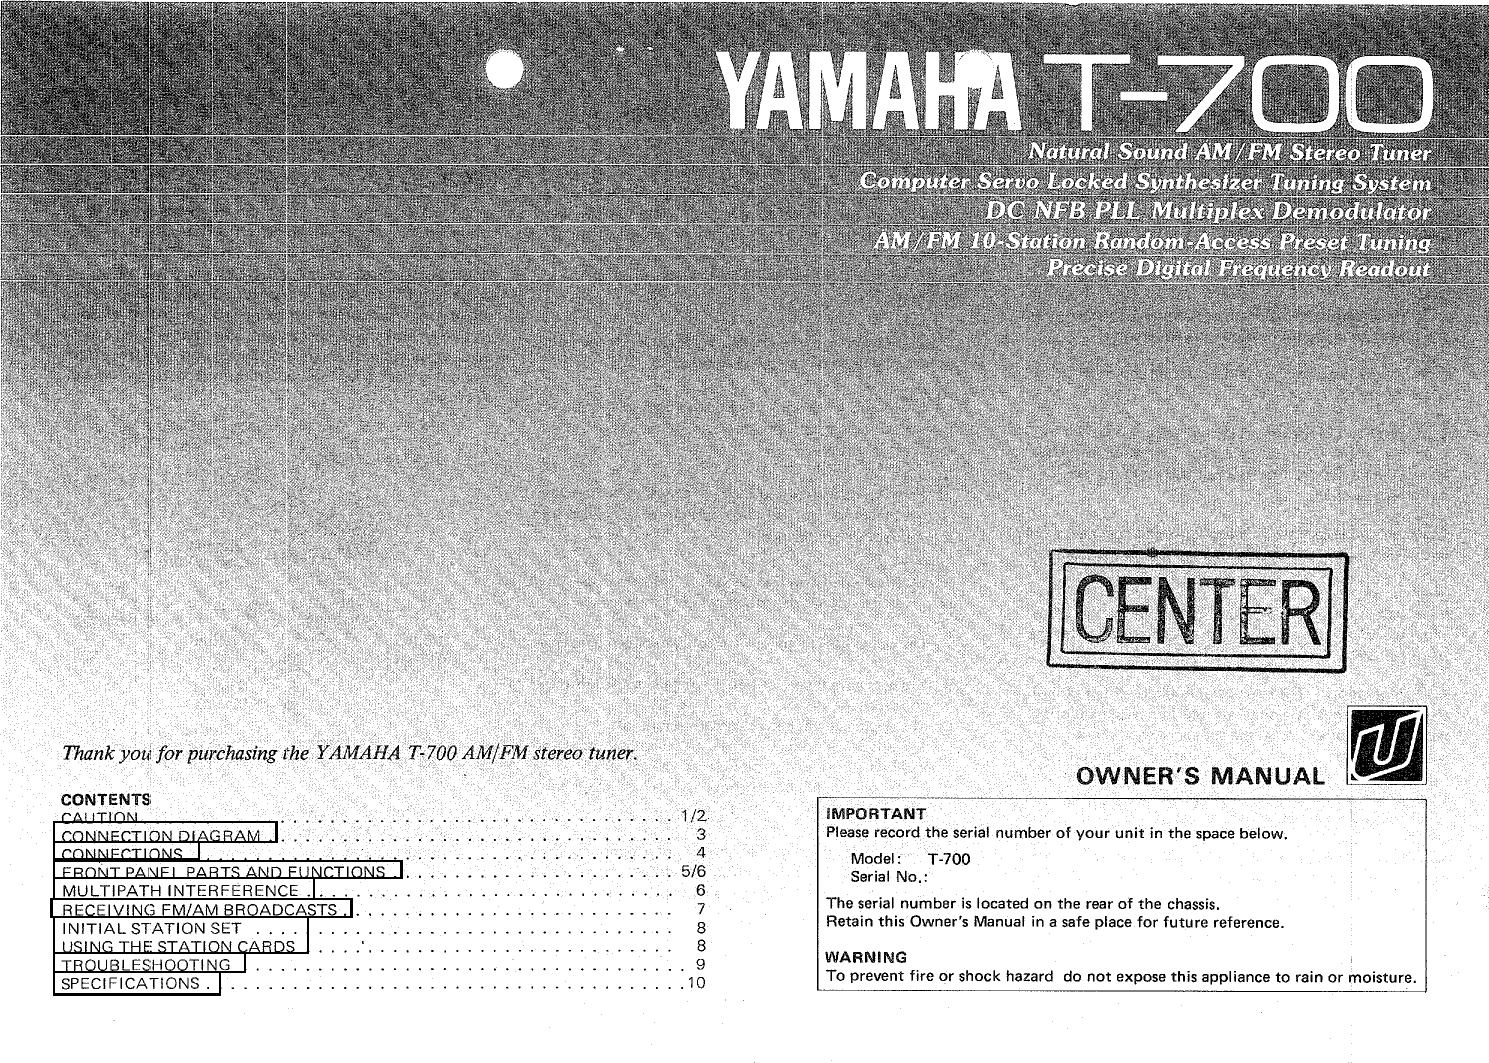 Page 1 of 12 - Yamaha .橡.ページ) T-700 OWNER'S MANUAL